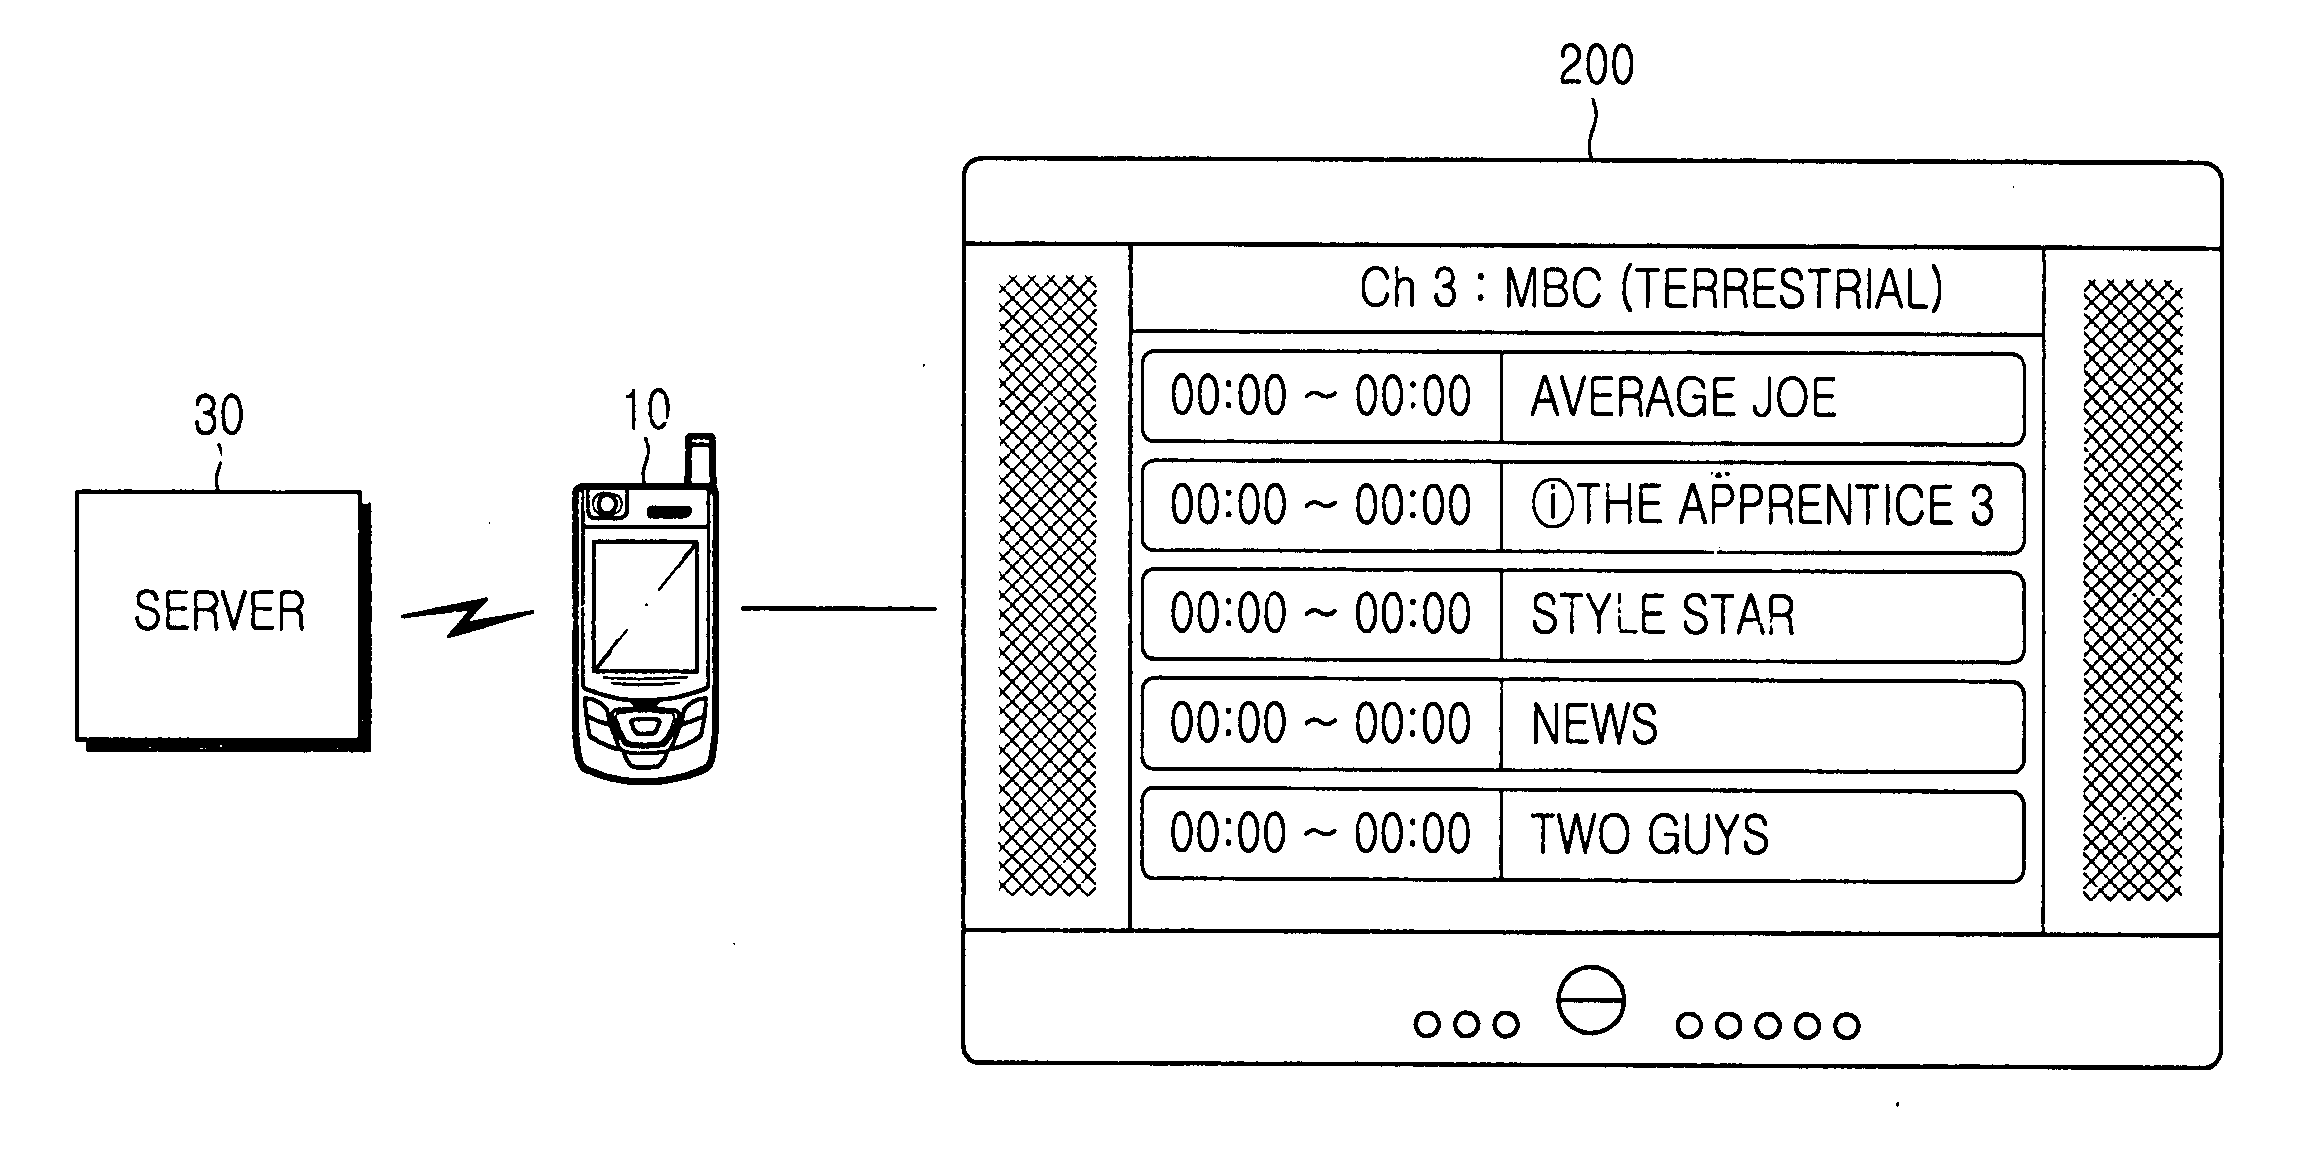 Mobile communication terminal capable of performing other functions while outputting DMB to external AV device